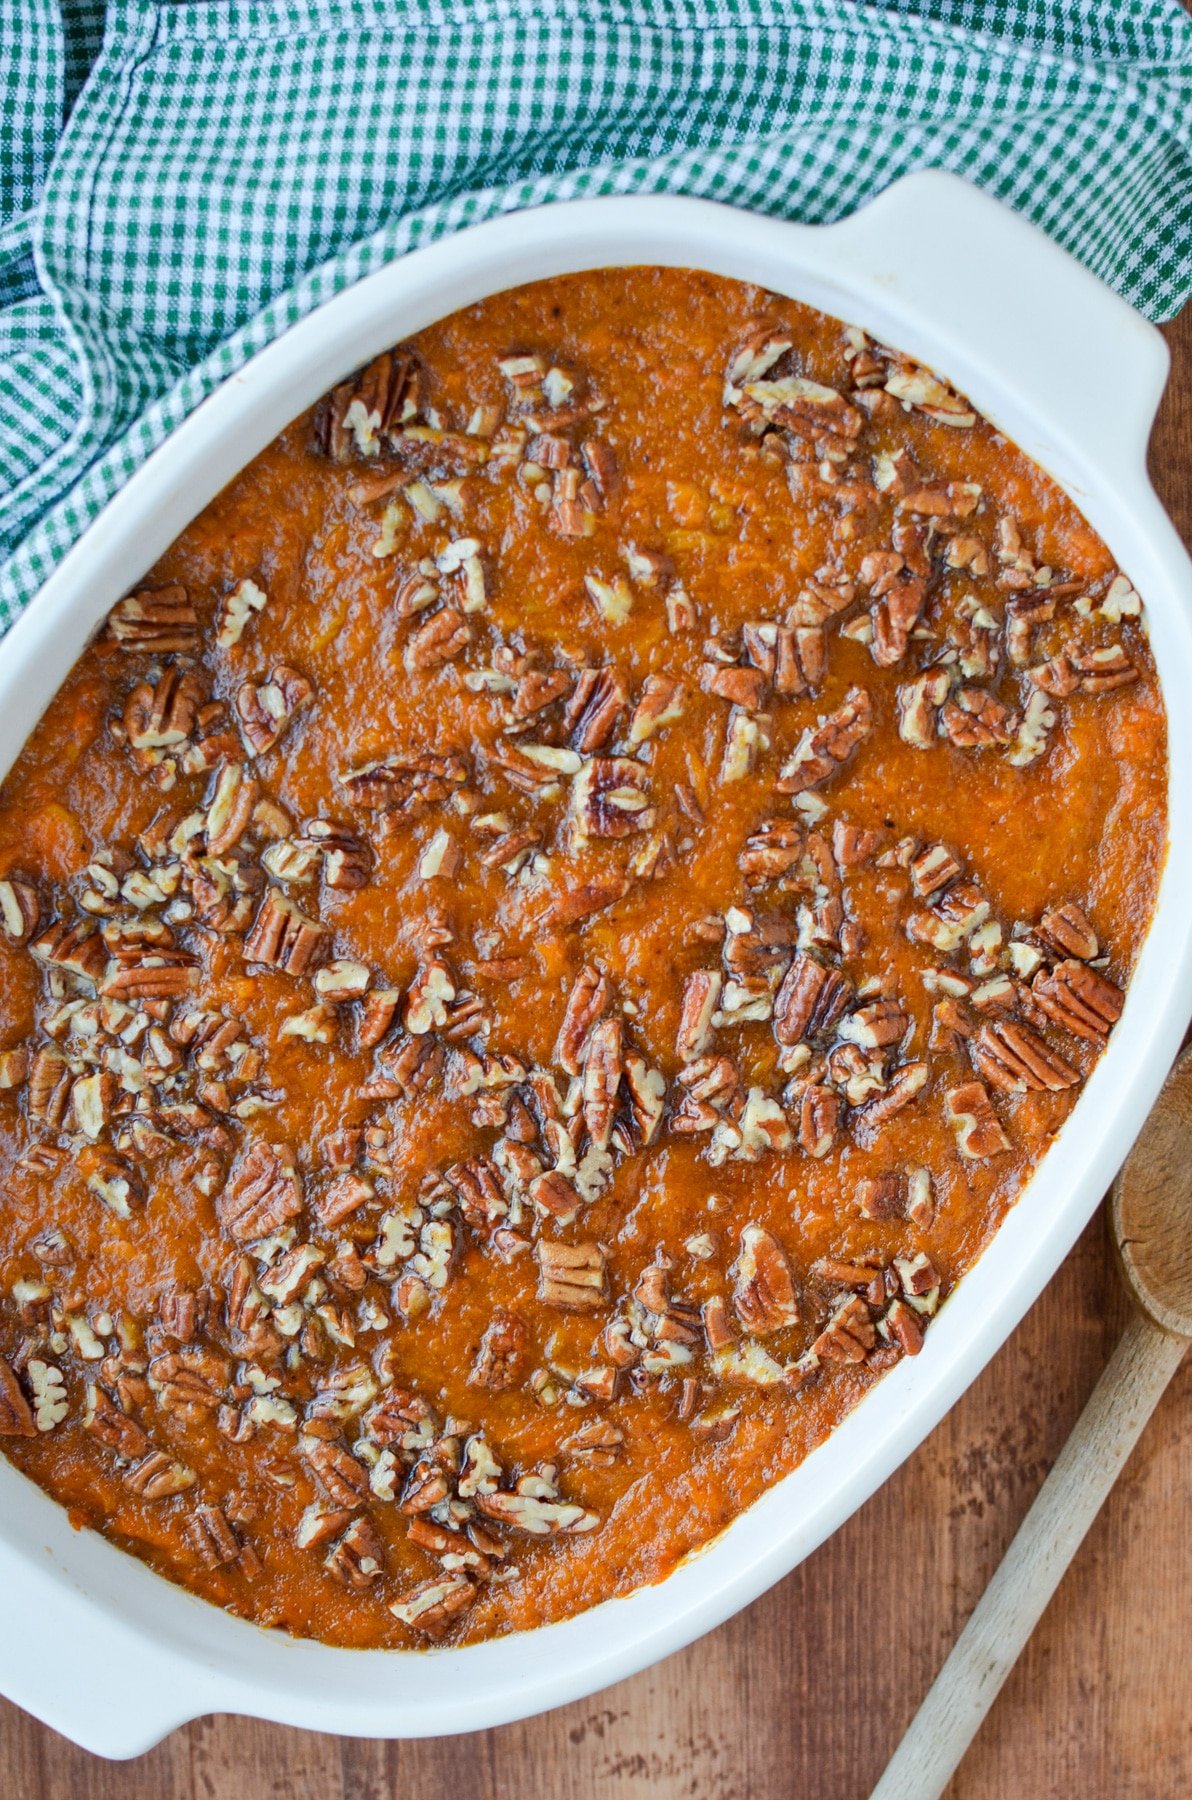 A baked healthy sweet potato casserole with a praline topping